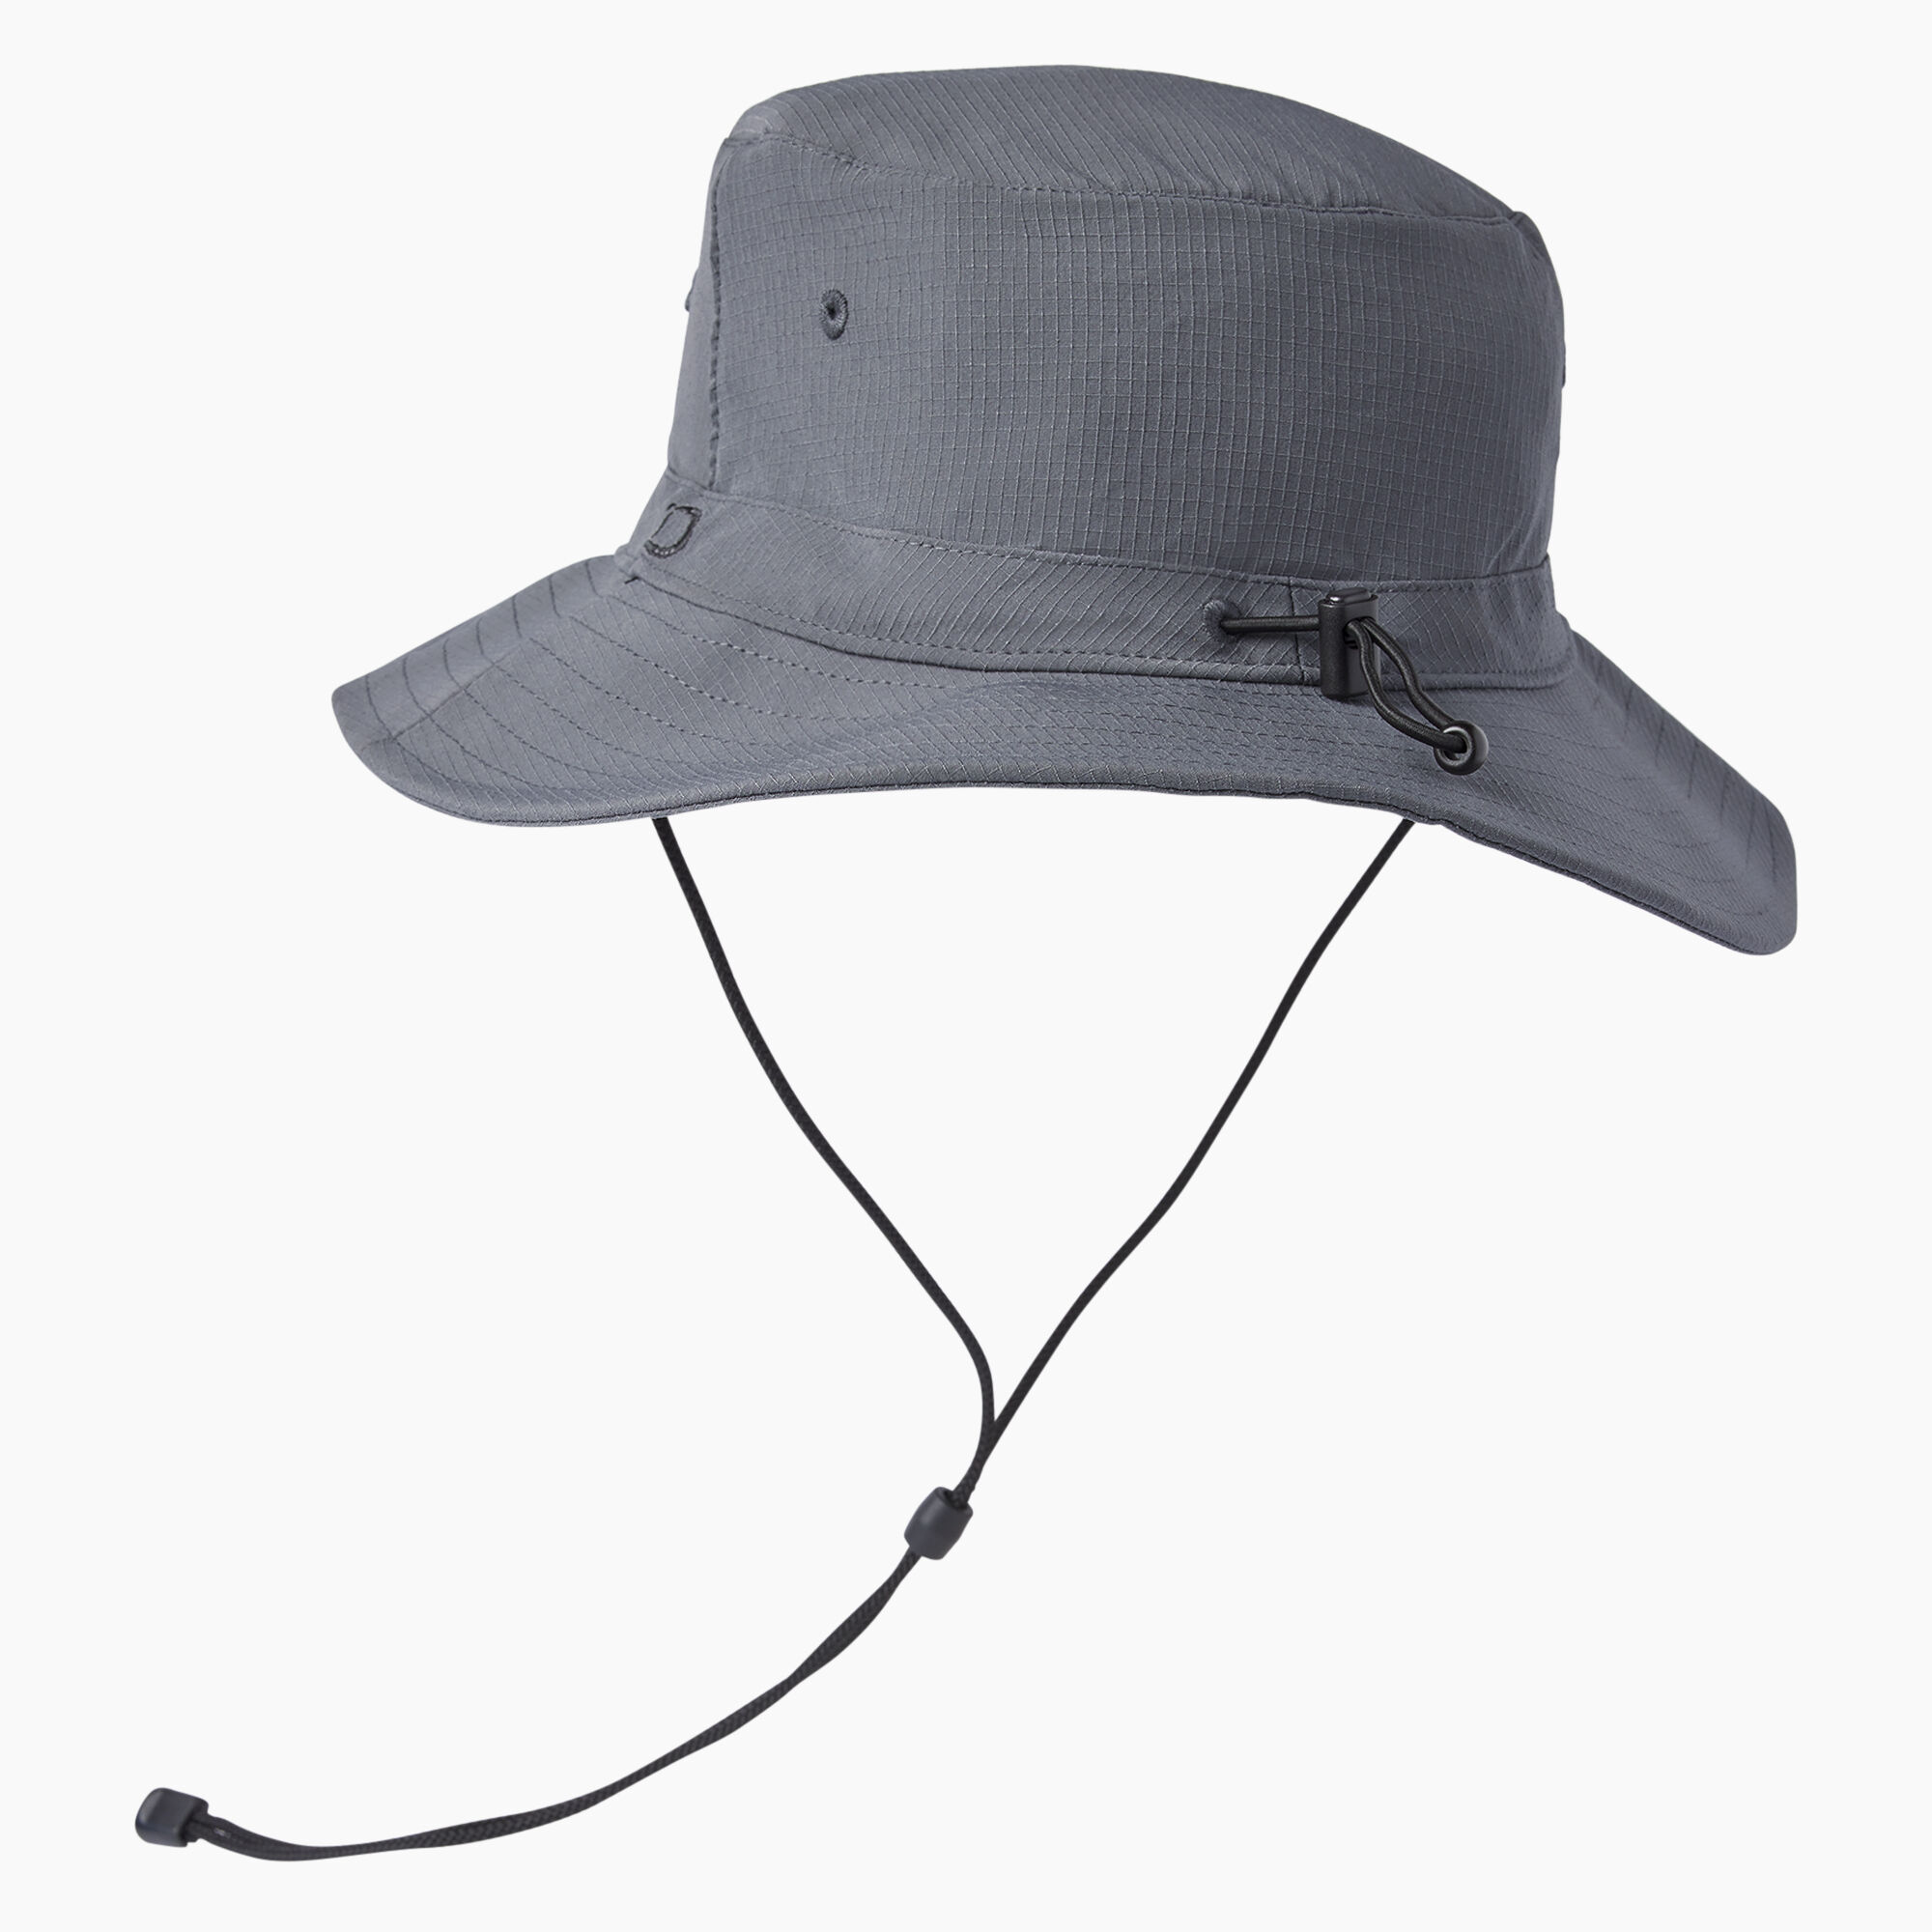 Full Brim Ripstop Boonie Hat with Neck Shade - Dickies US